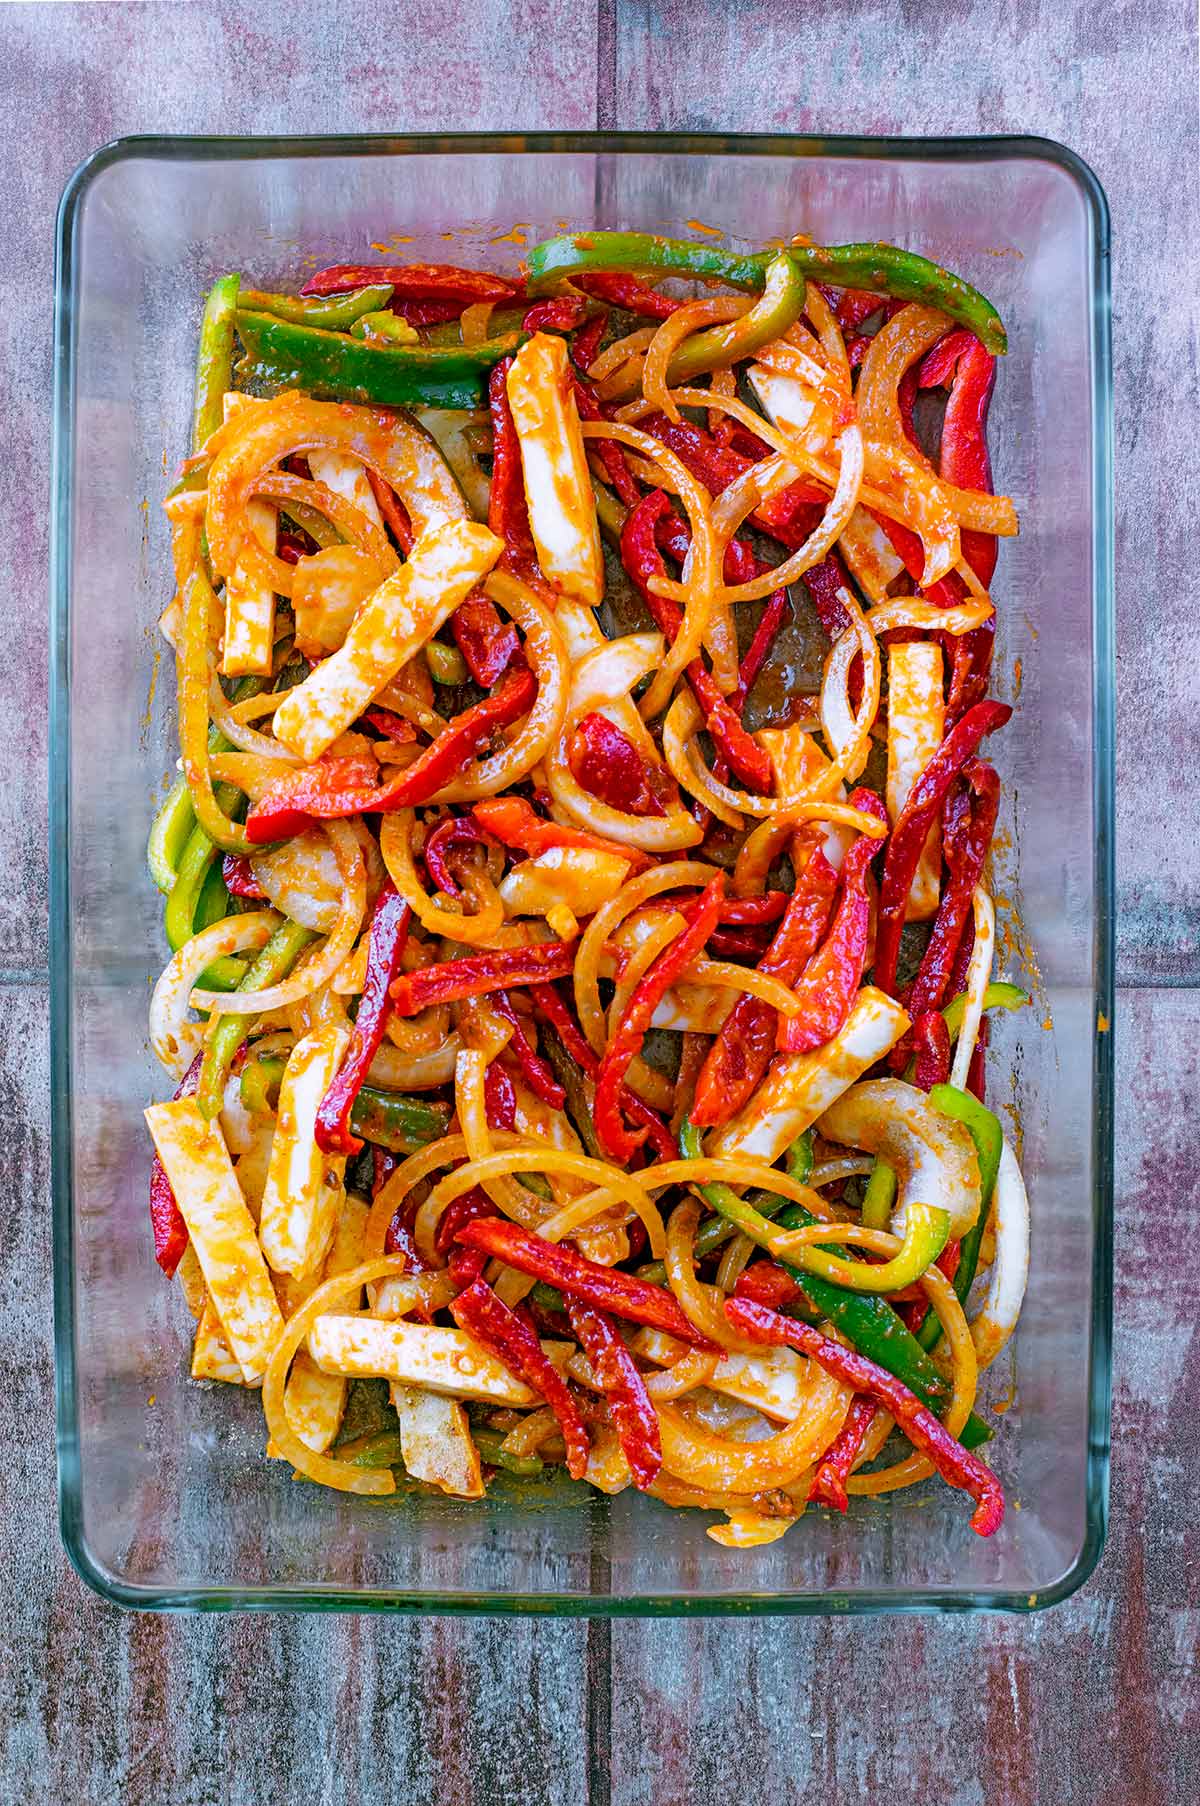 A large glass baking dish containing sliced peppers, onions and halloumi, all covered in fajita seasoning.